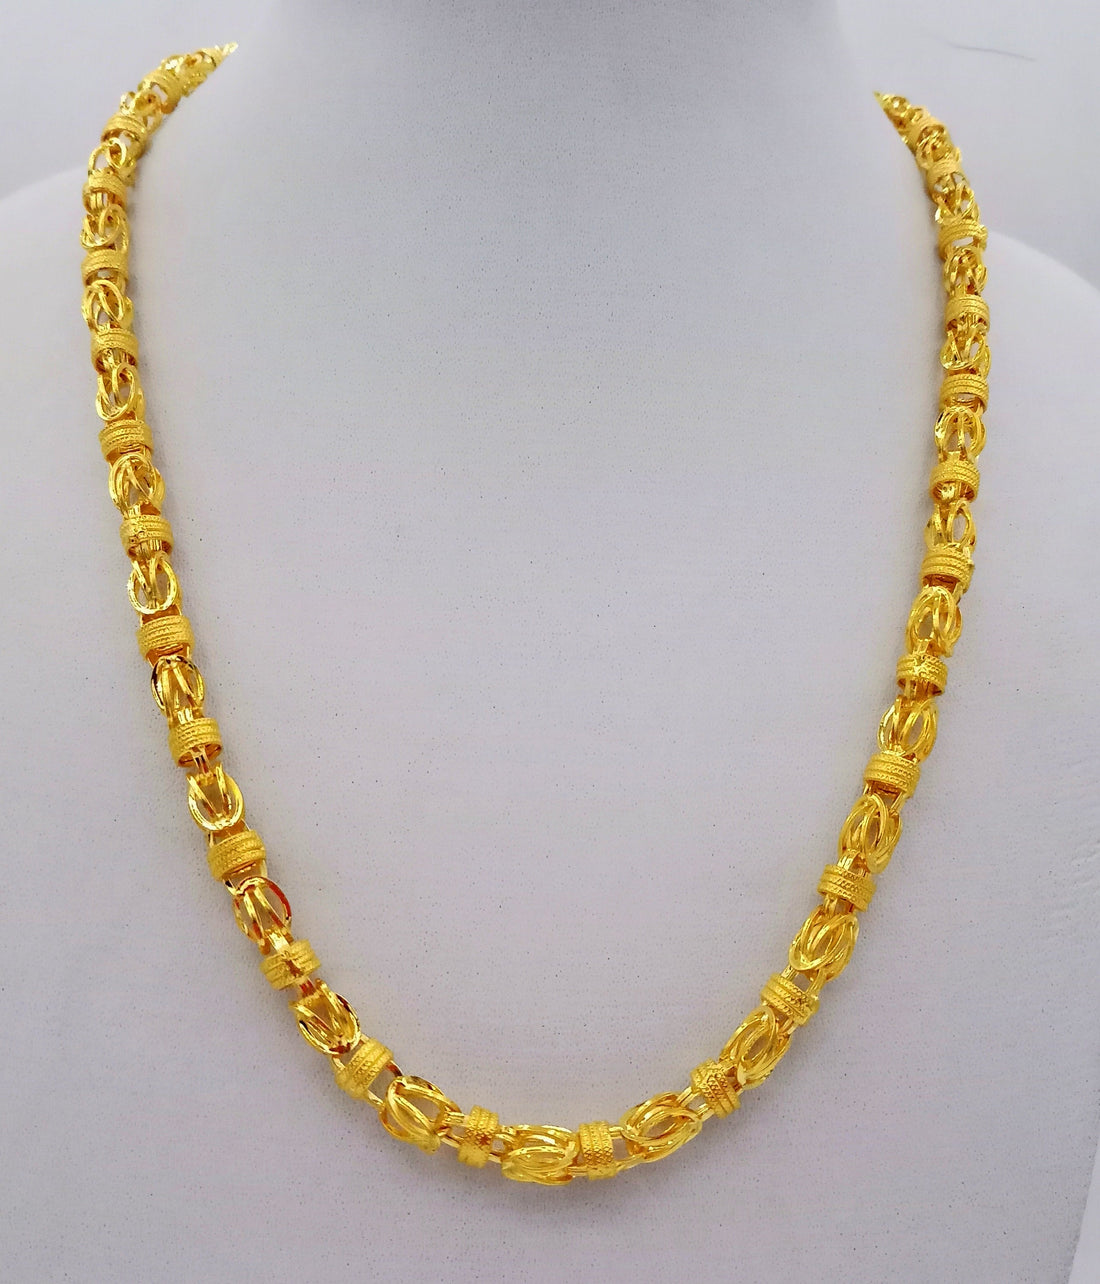 22karat yellow gold handmade 20 inches long amazing byzantine chain necklace certified india jewelry for unisex gifting - TRIBAL ORNAMENTS